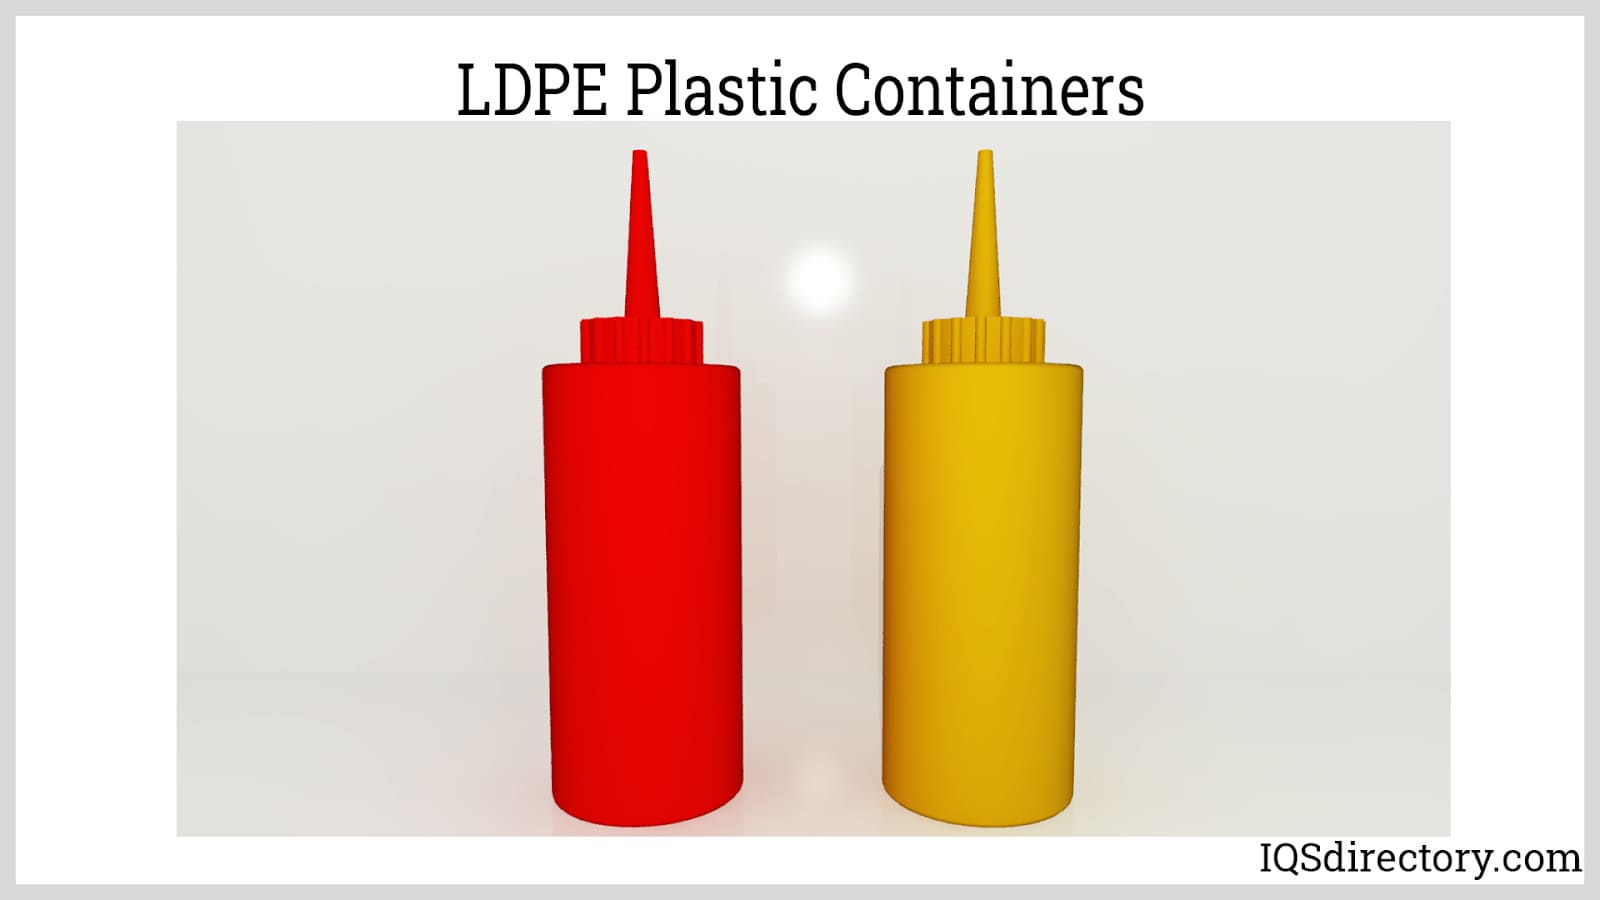 LDPE Plastic Containers